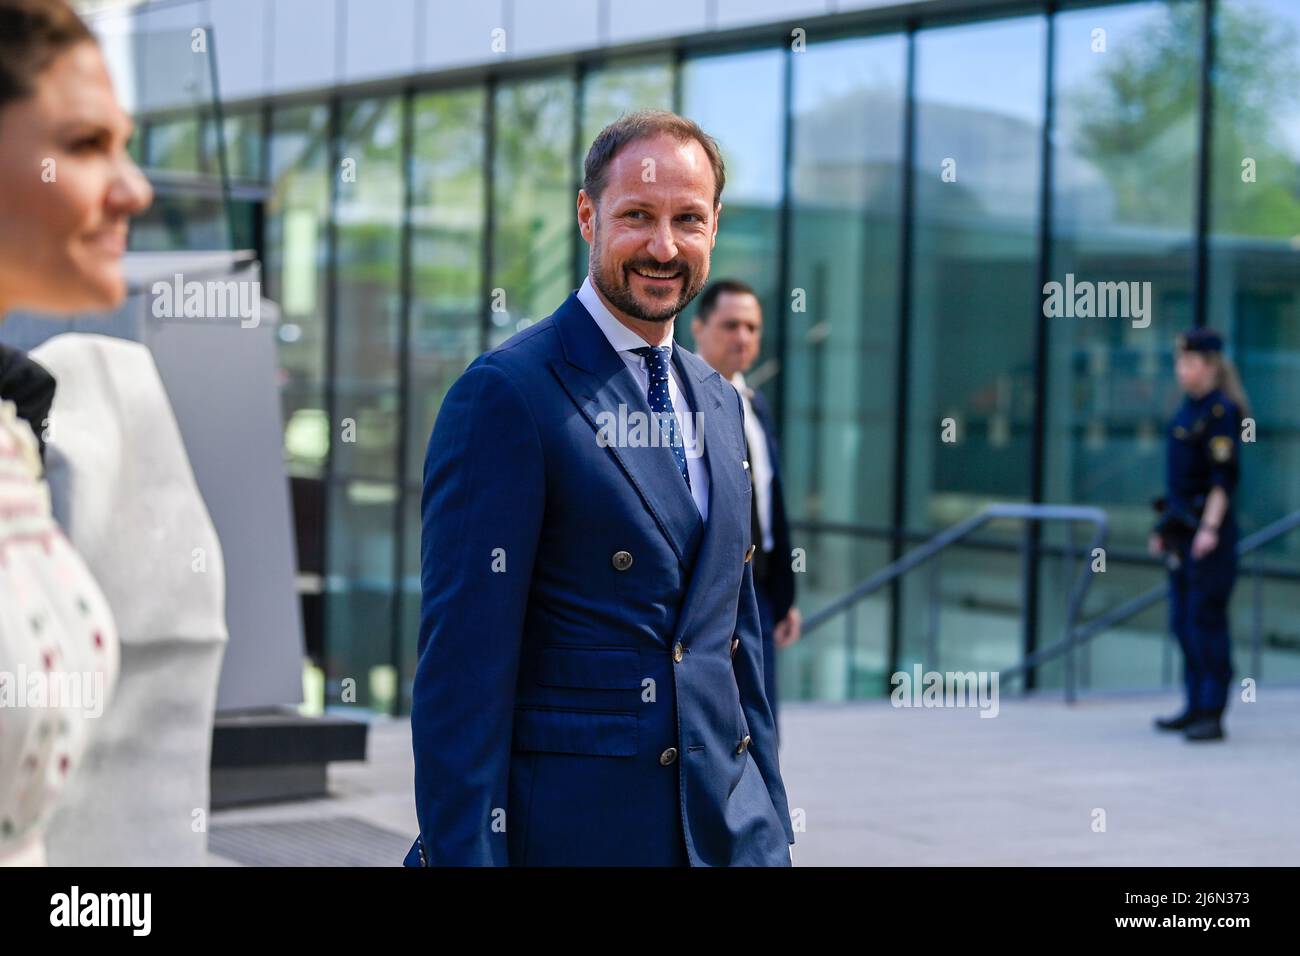 Stockholm, Sweden 20220502.Crown Prince Haakon at Karolinska Institutet in Solna. The Norwegian Crown Prince and Crown Princess will visit Sweden for three days. Photo: Annika Byrde / NTB Stock Photo